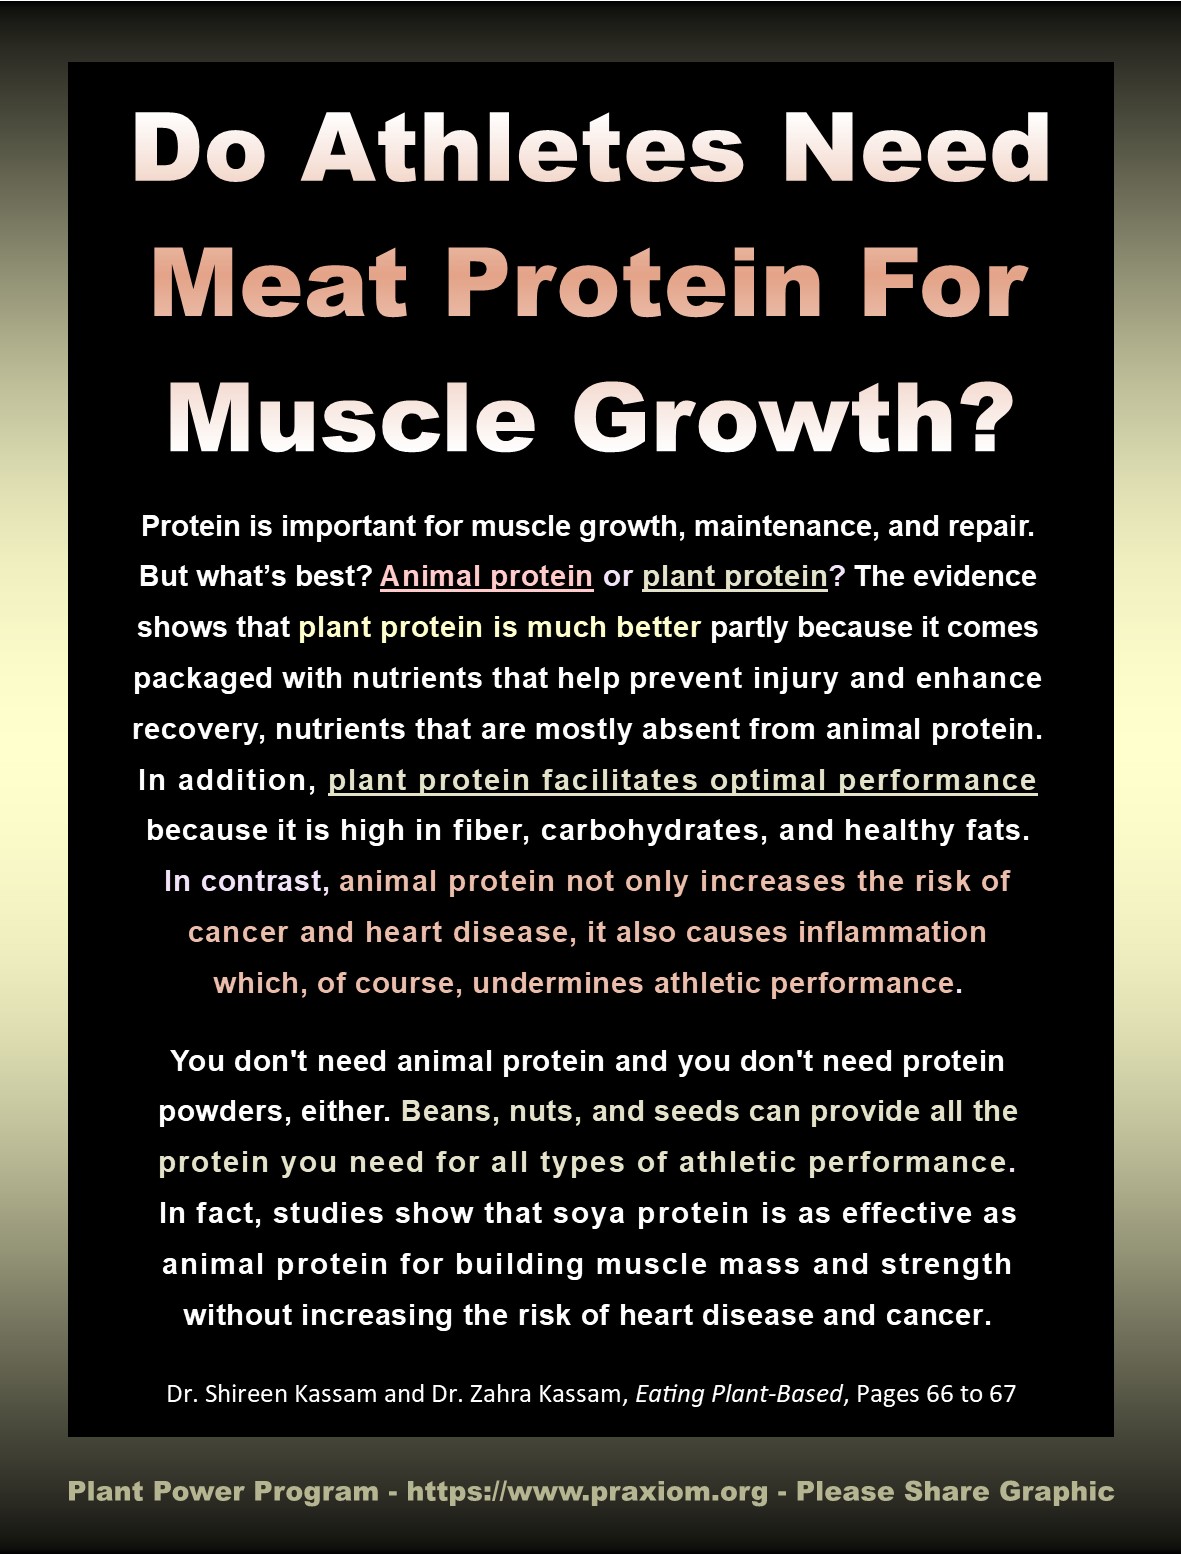 Do Athletes Need Meat Protein for Muscle Grown? - Dr Shireen Kassam and Dr. Zahra Kassam